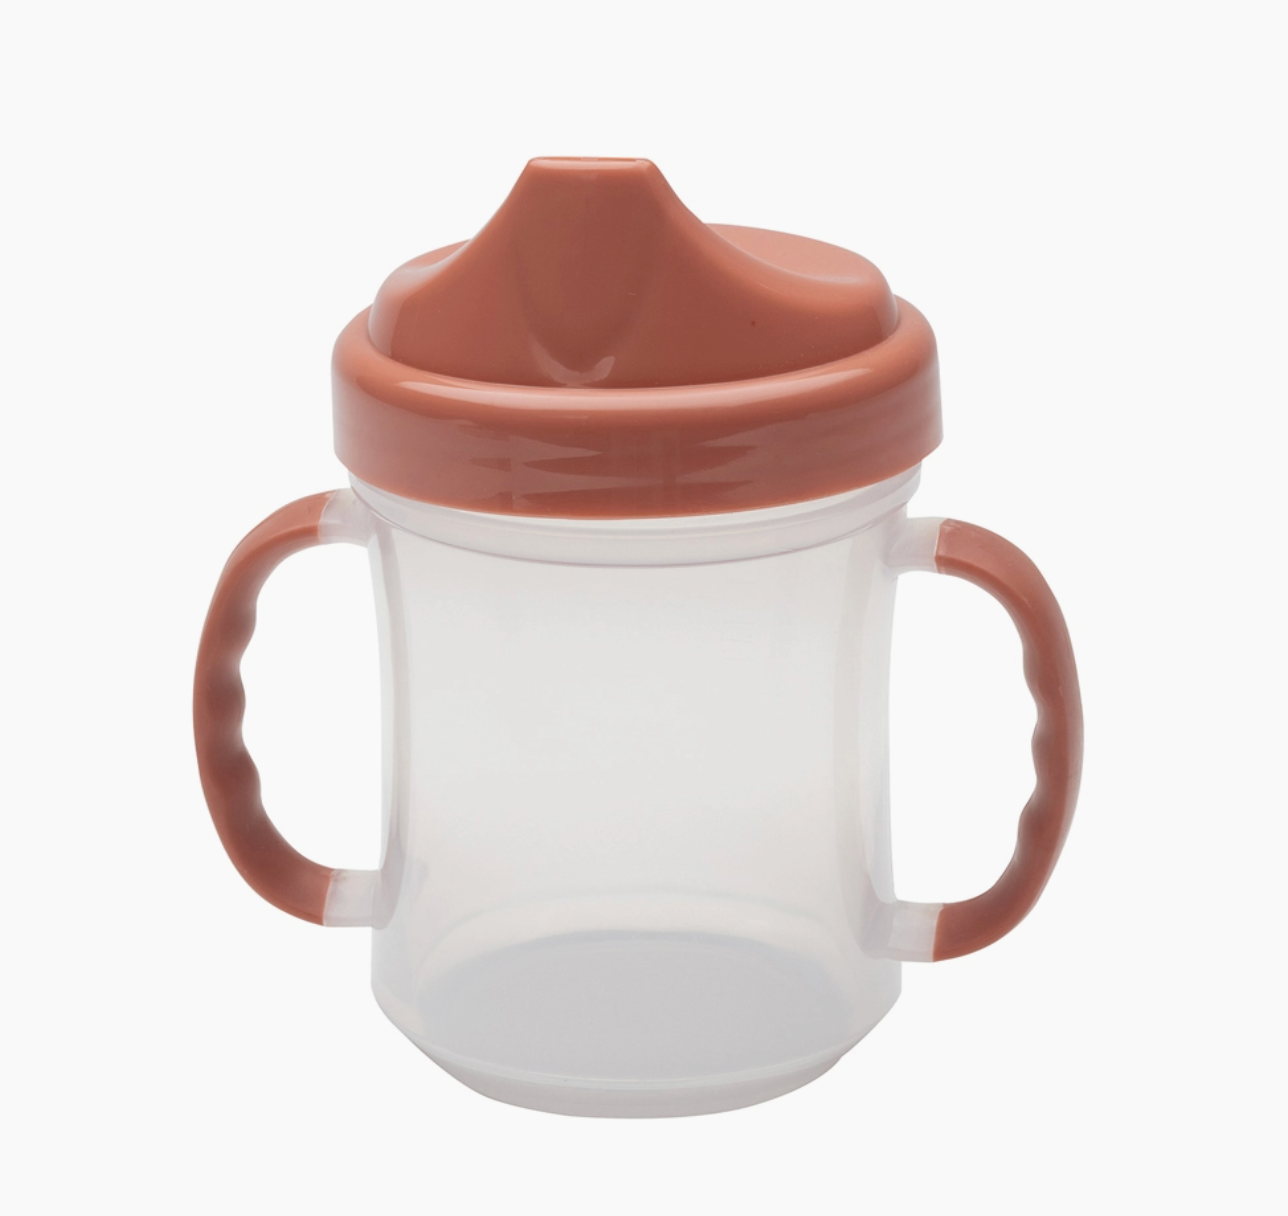 Lil' Bitty Sippy